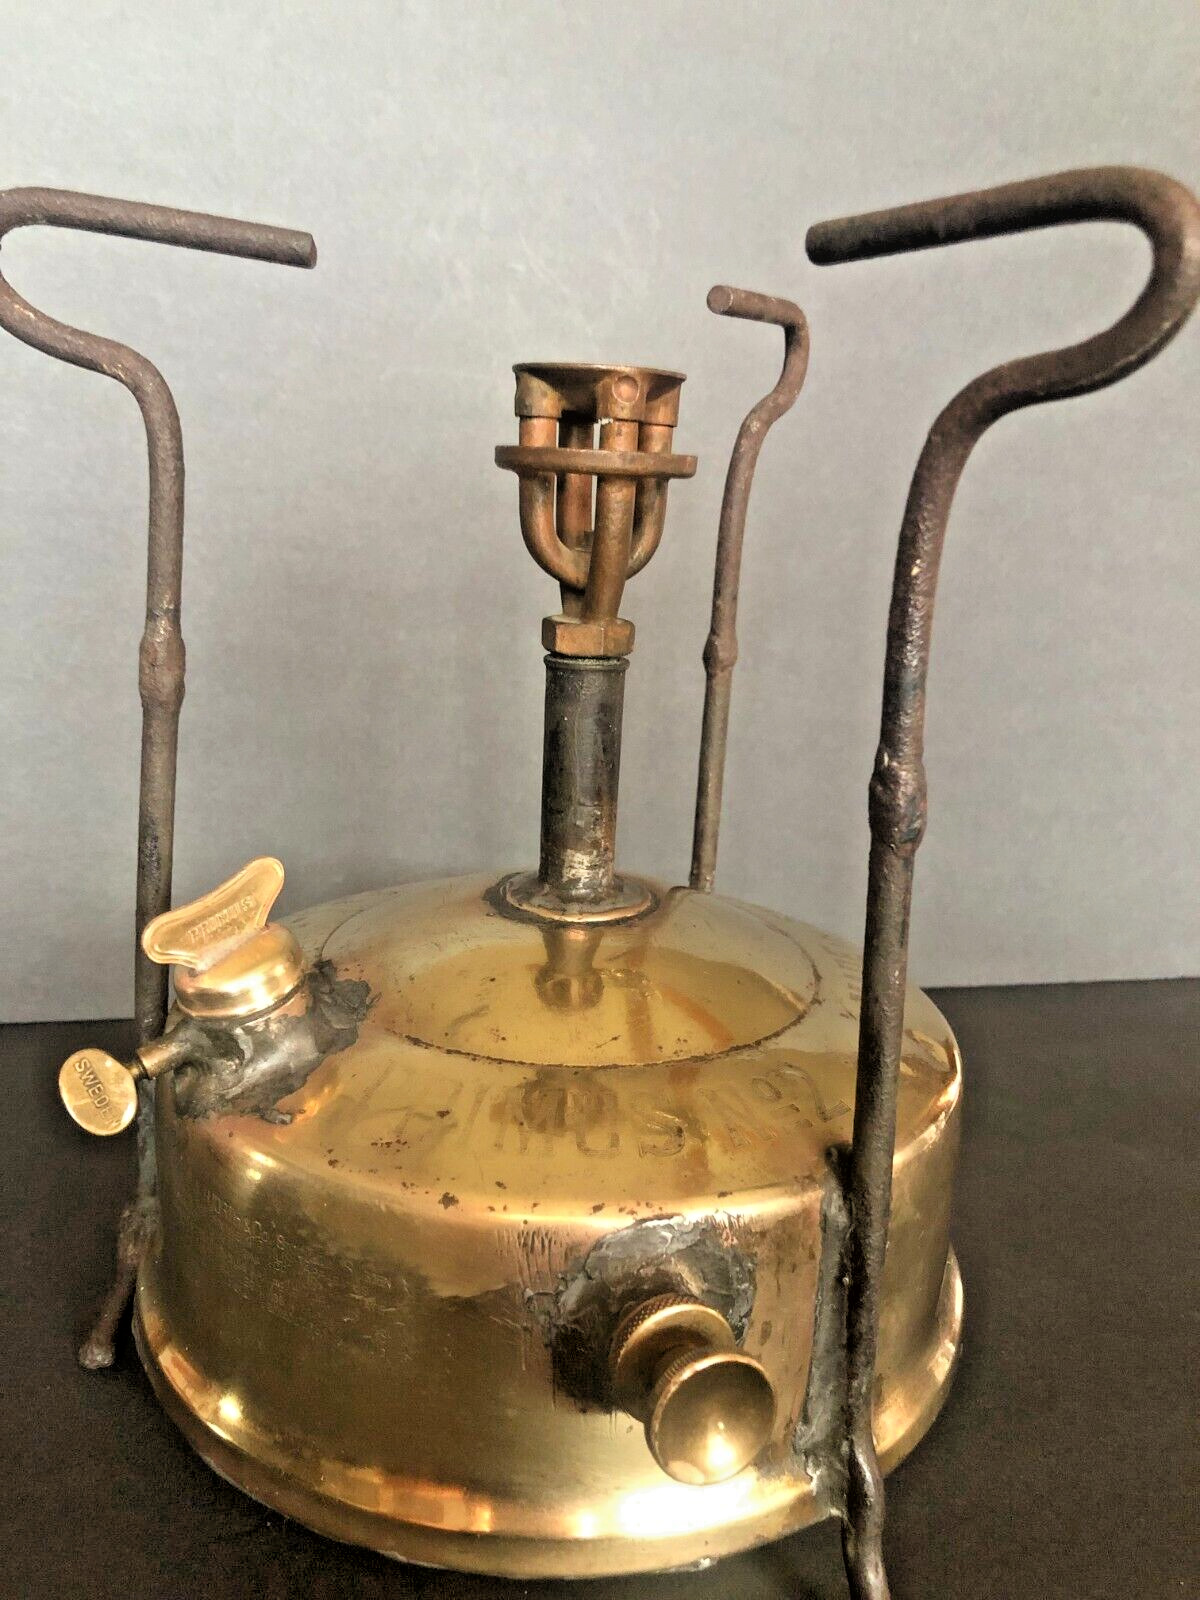 Antique Primus #2 brass camp cook stove made in Sweden early 1900\'s  Rare